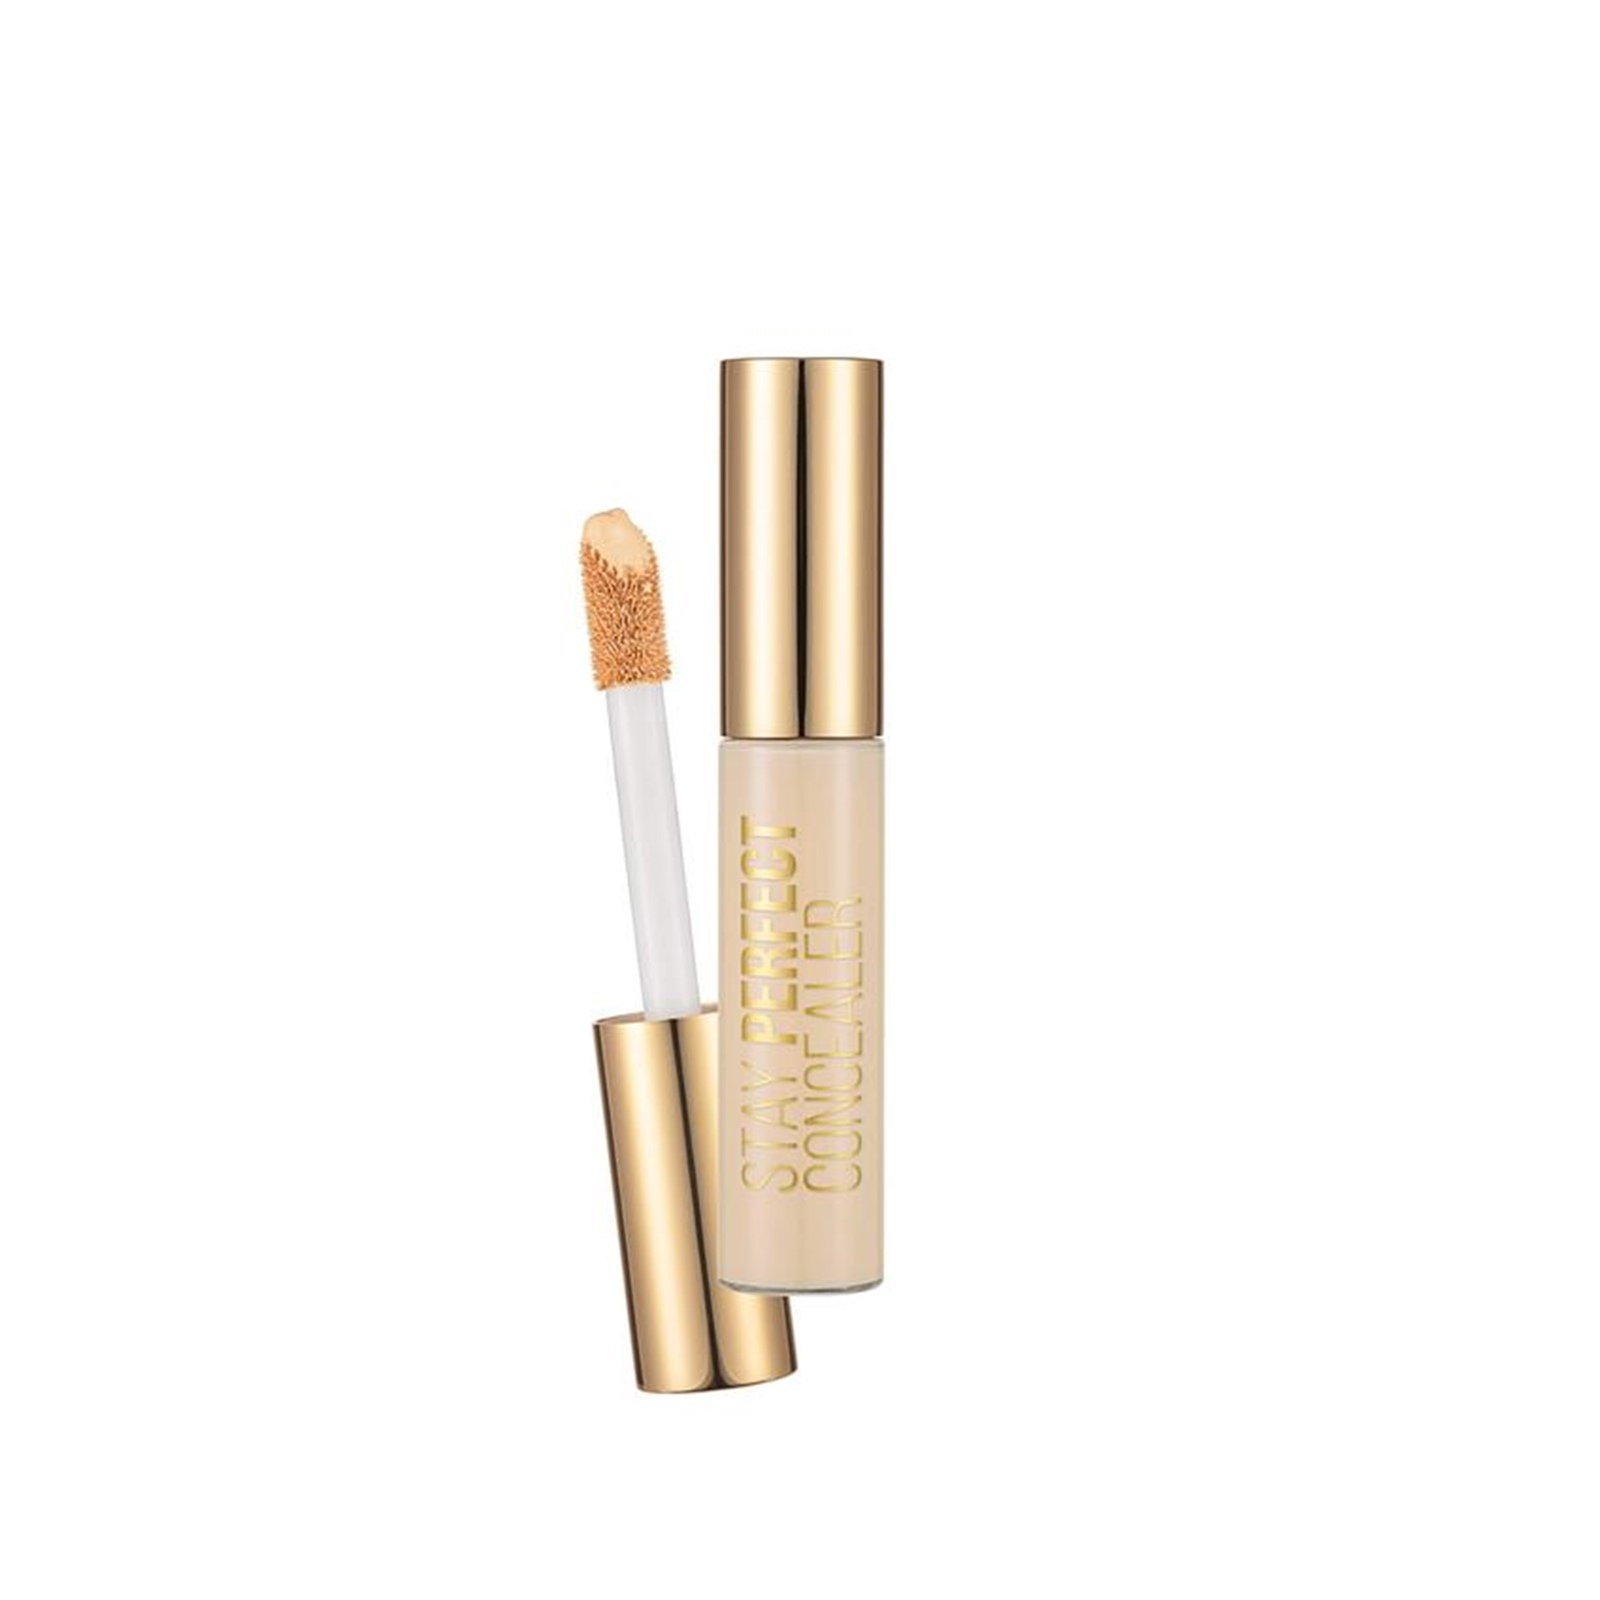 https://static.beautytocare.com/cdn-cgi/image/width=1600,height=1600,f=auto/media/catalog/product//f/l/flormar-stay-perfect-concealer-002-light-12-5ml.jpg